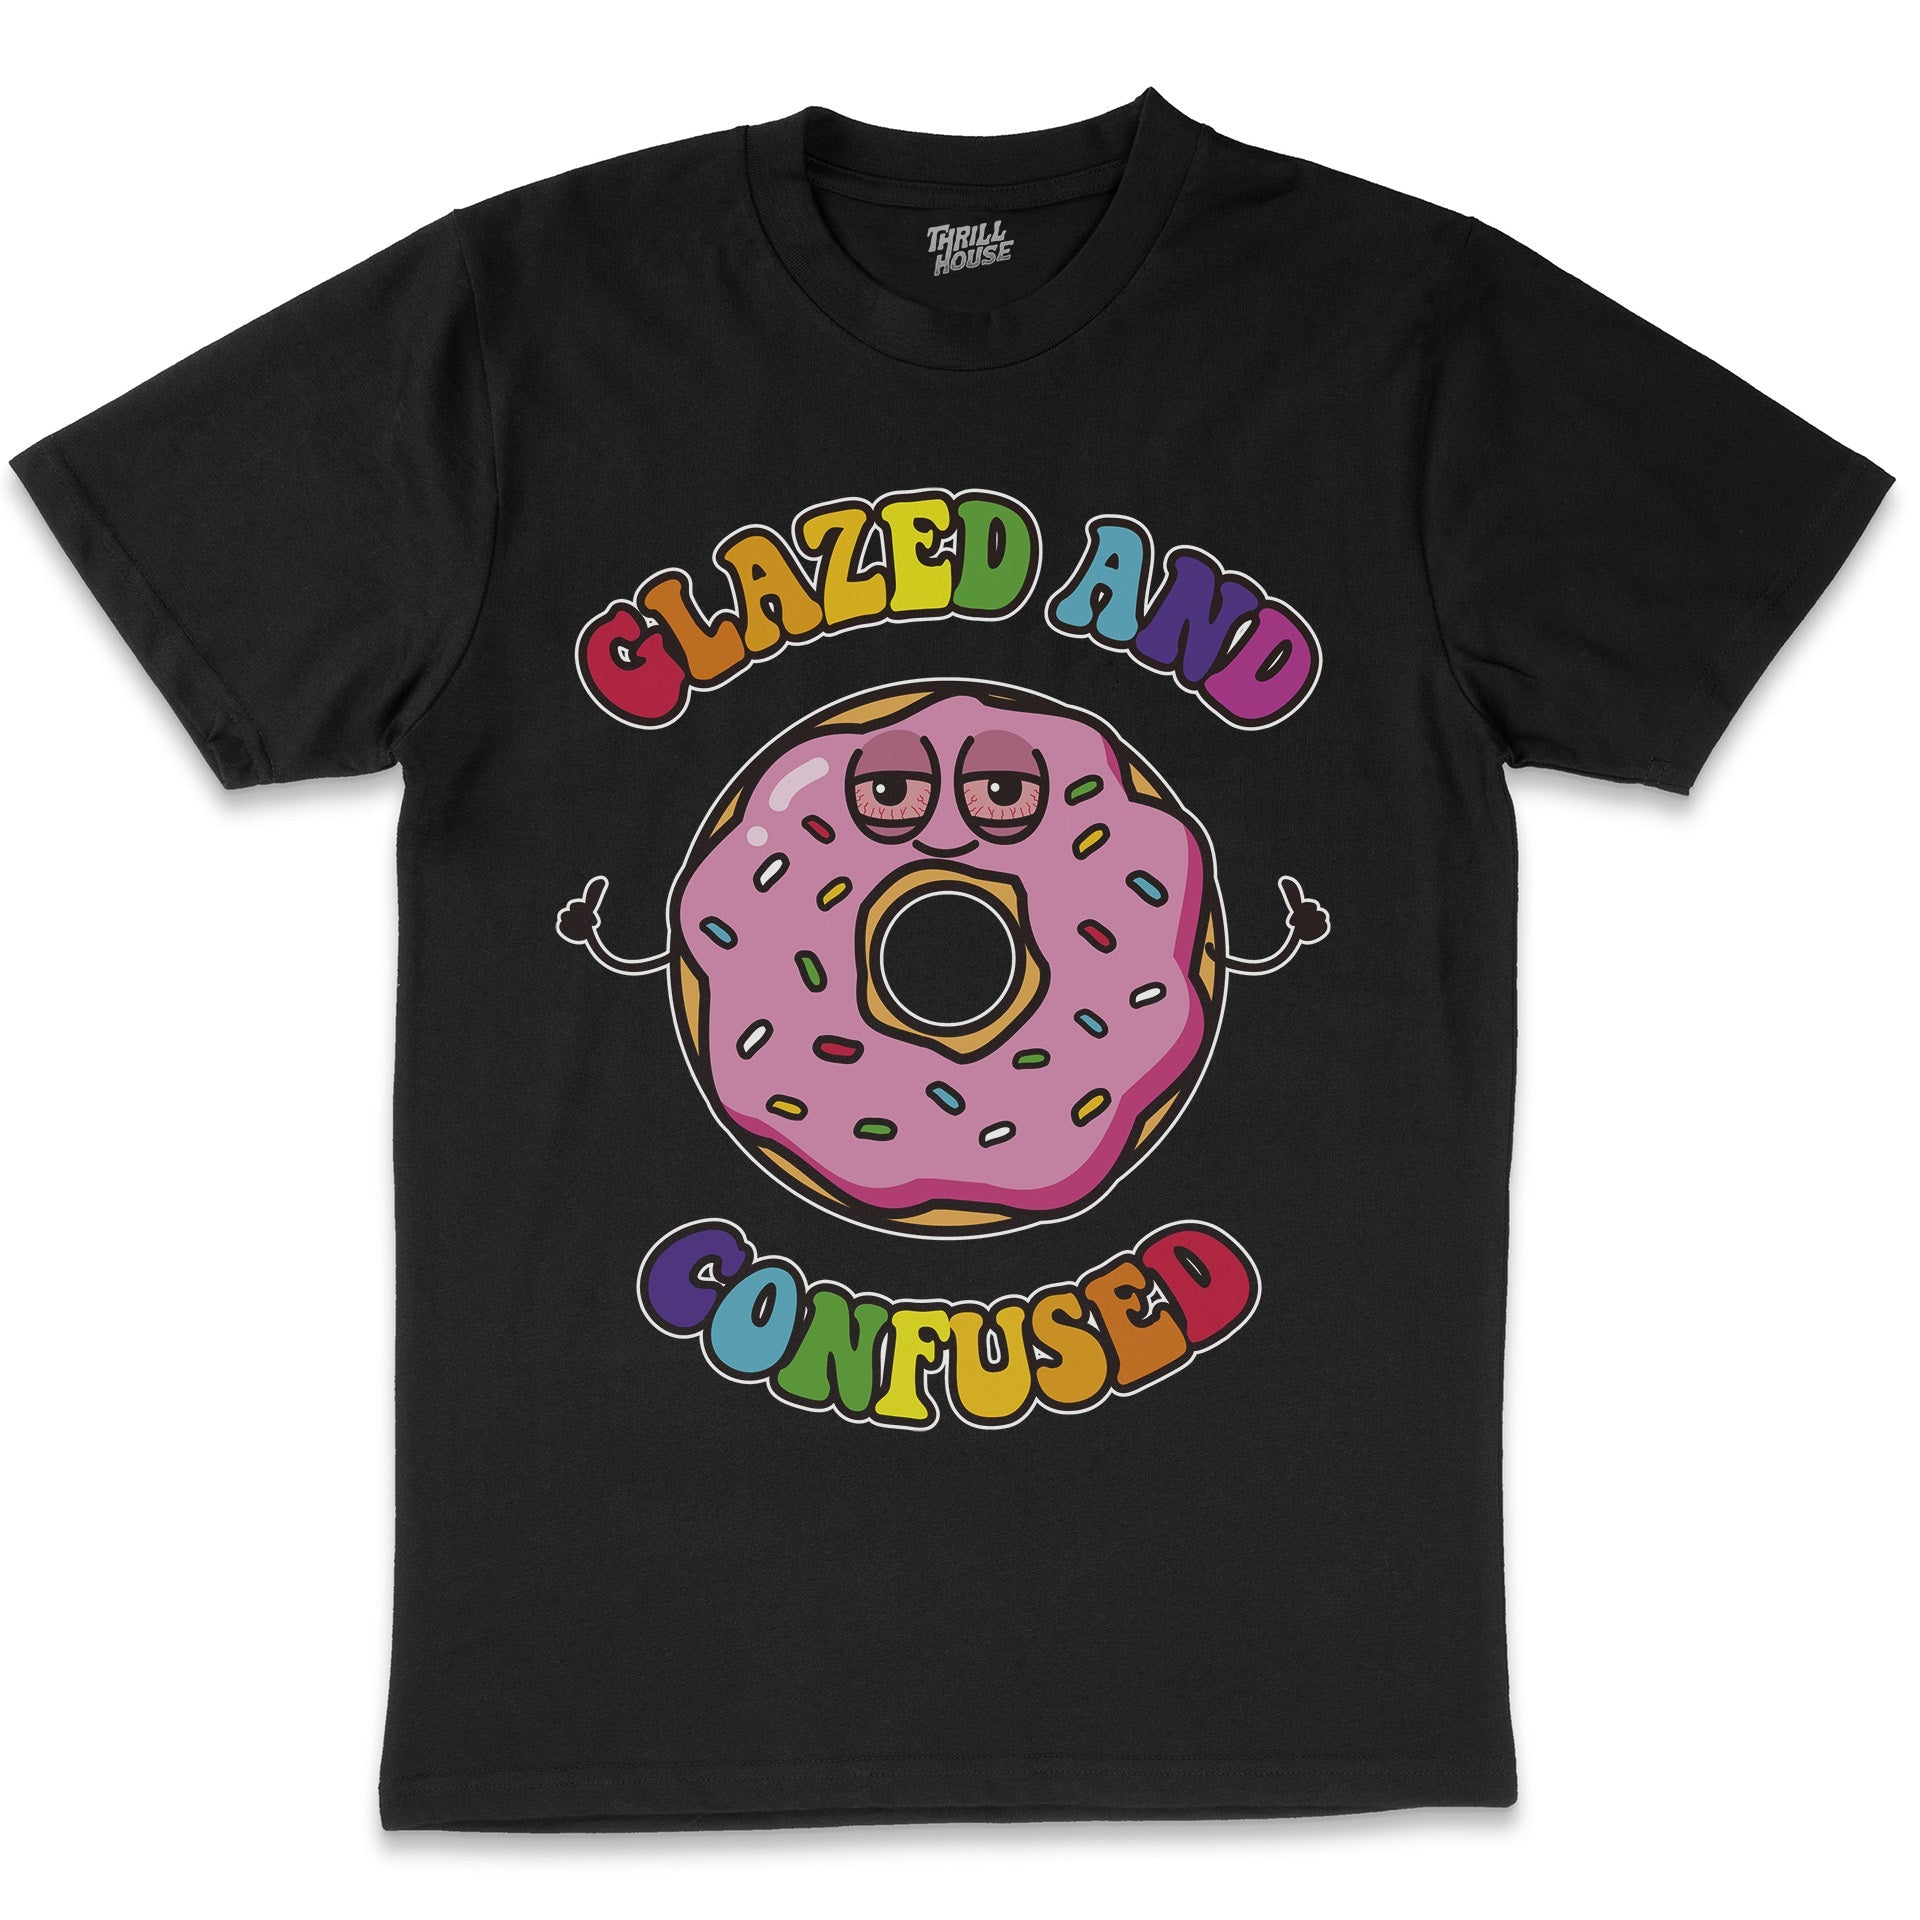 Glazed and Confused Funny Donut Stoner Munchies Spliff Weed Stoned Slogan Cotton T-Shirt